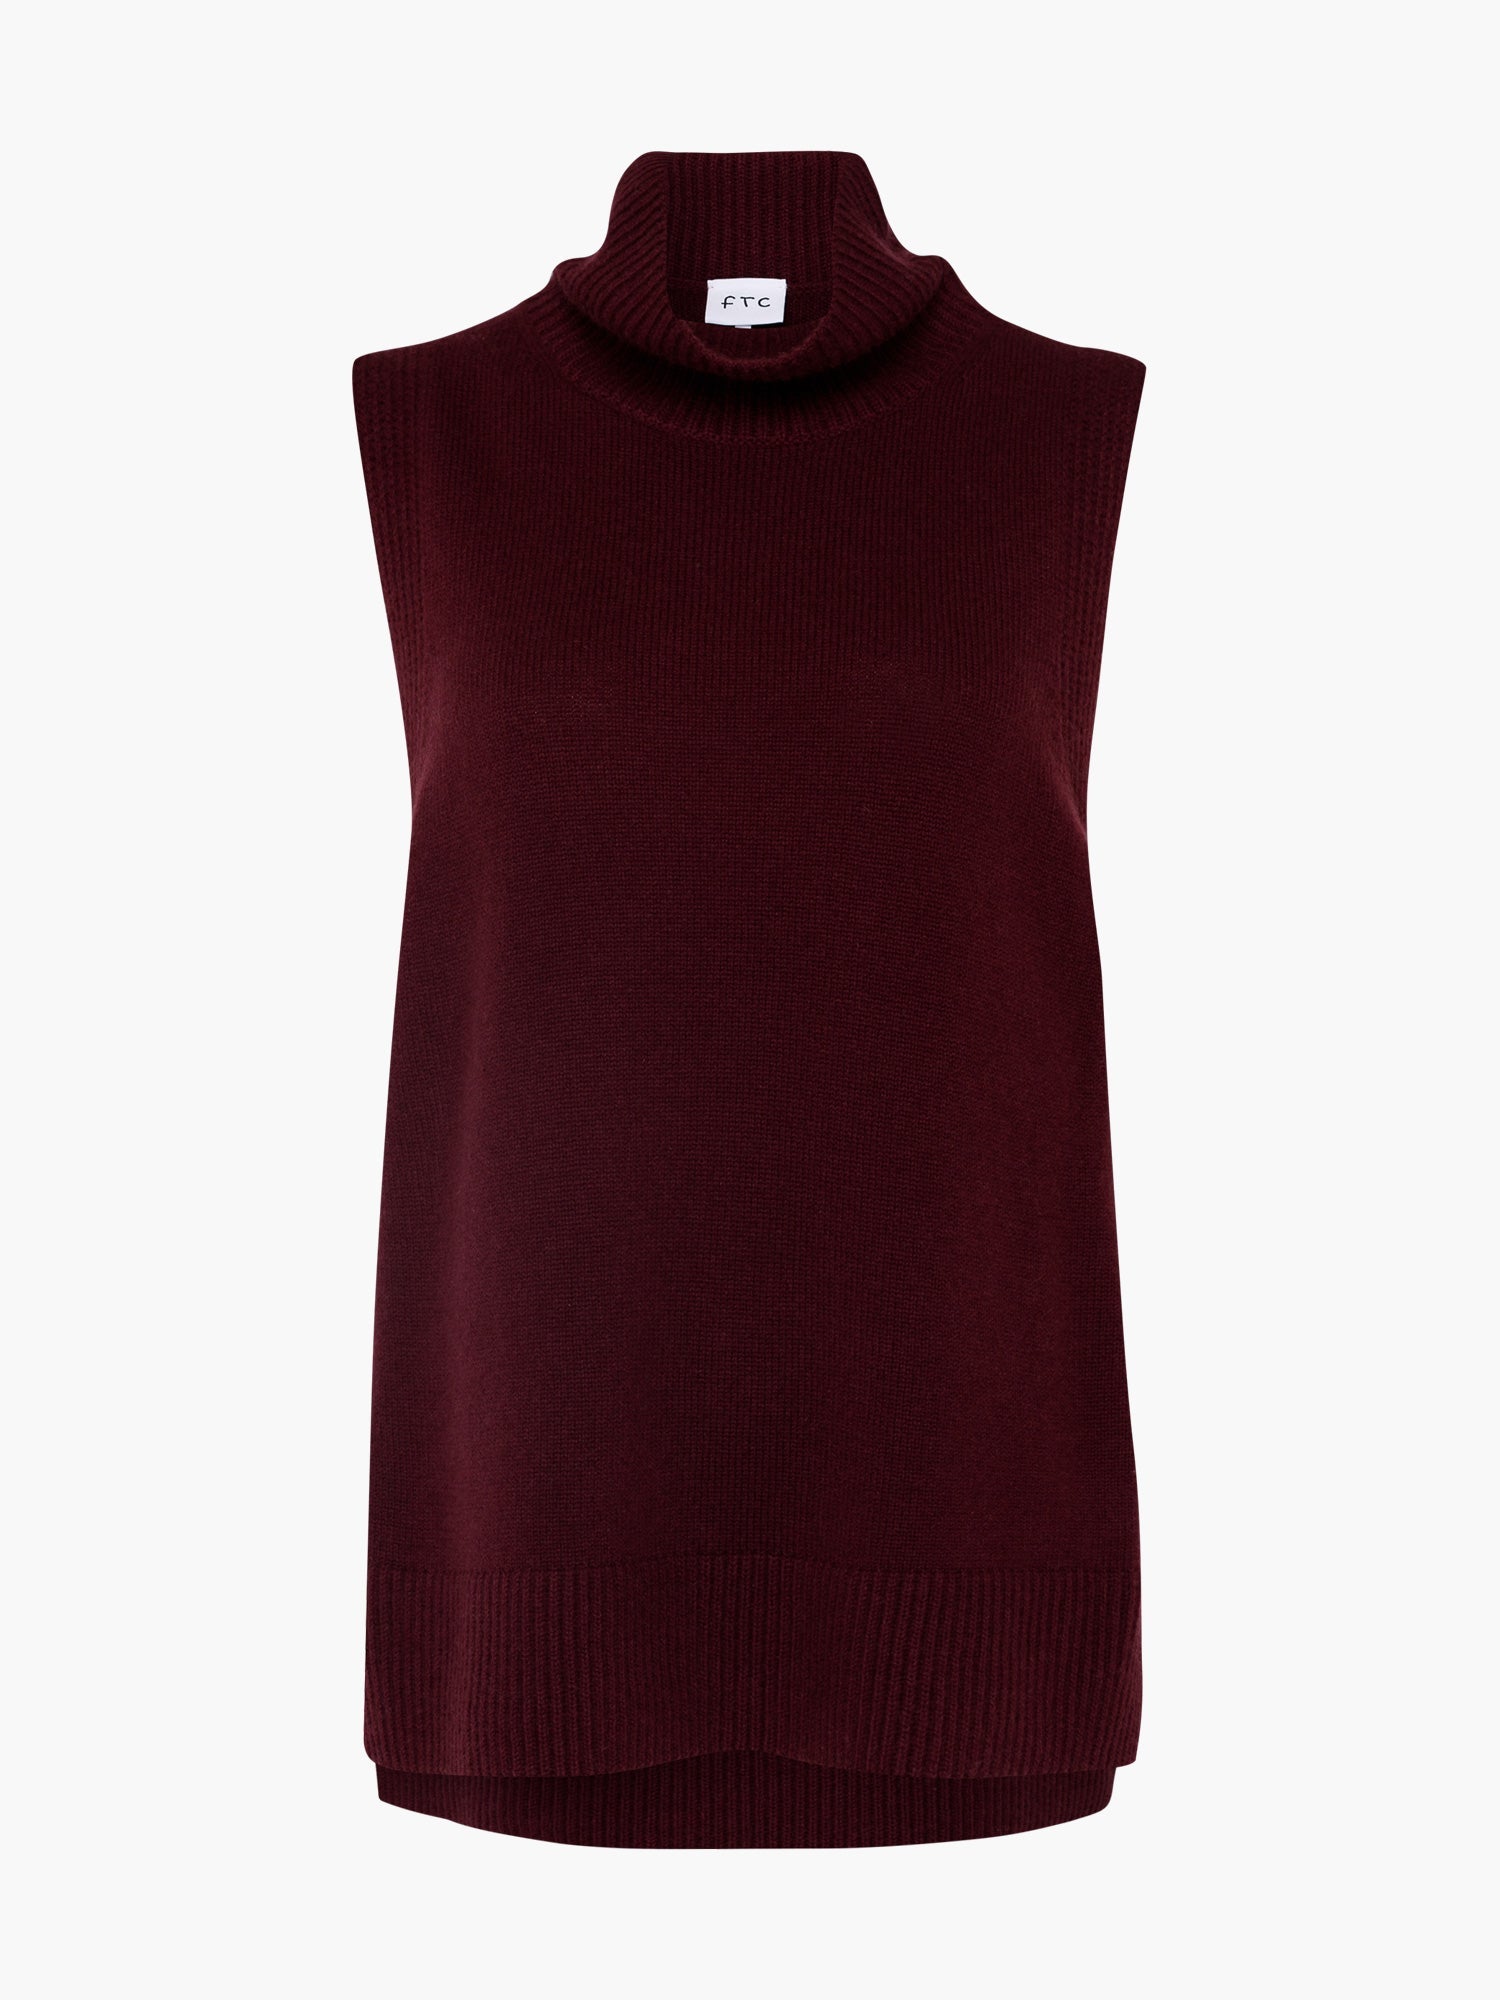 FTC-Cashmere-OUTLET-SALE-Pullover-Highneck-no-Sleeve-Strick-ARCHIVE-COLLECTION.jpg